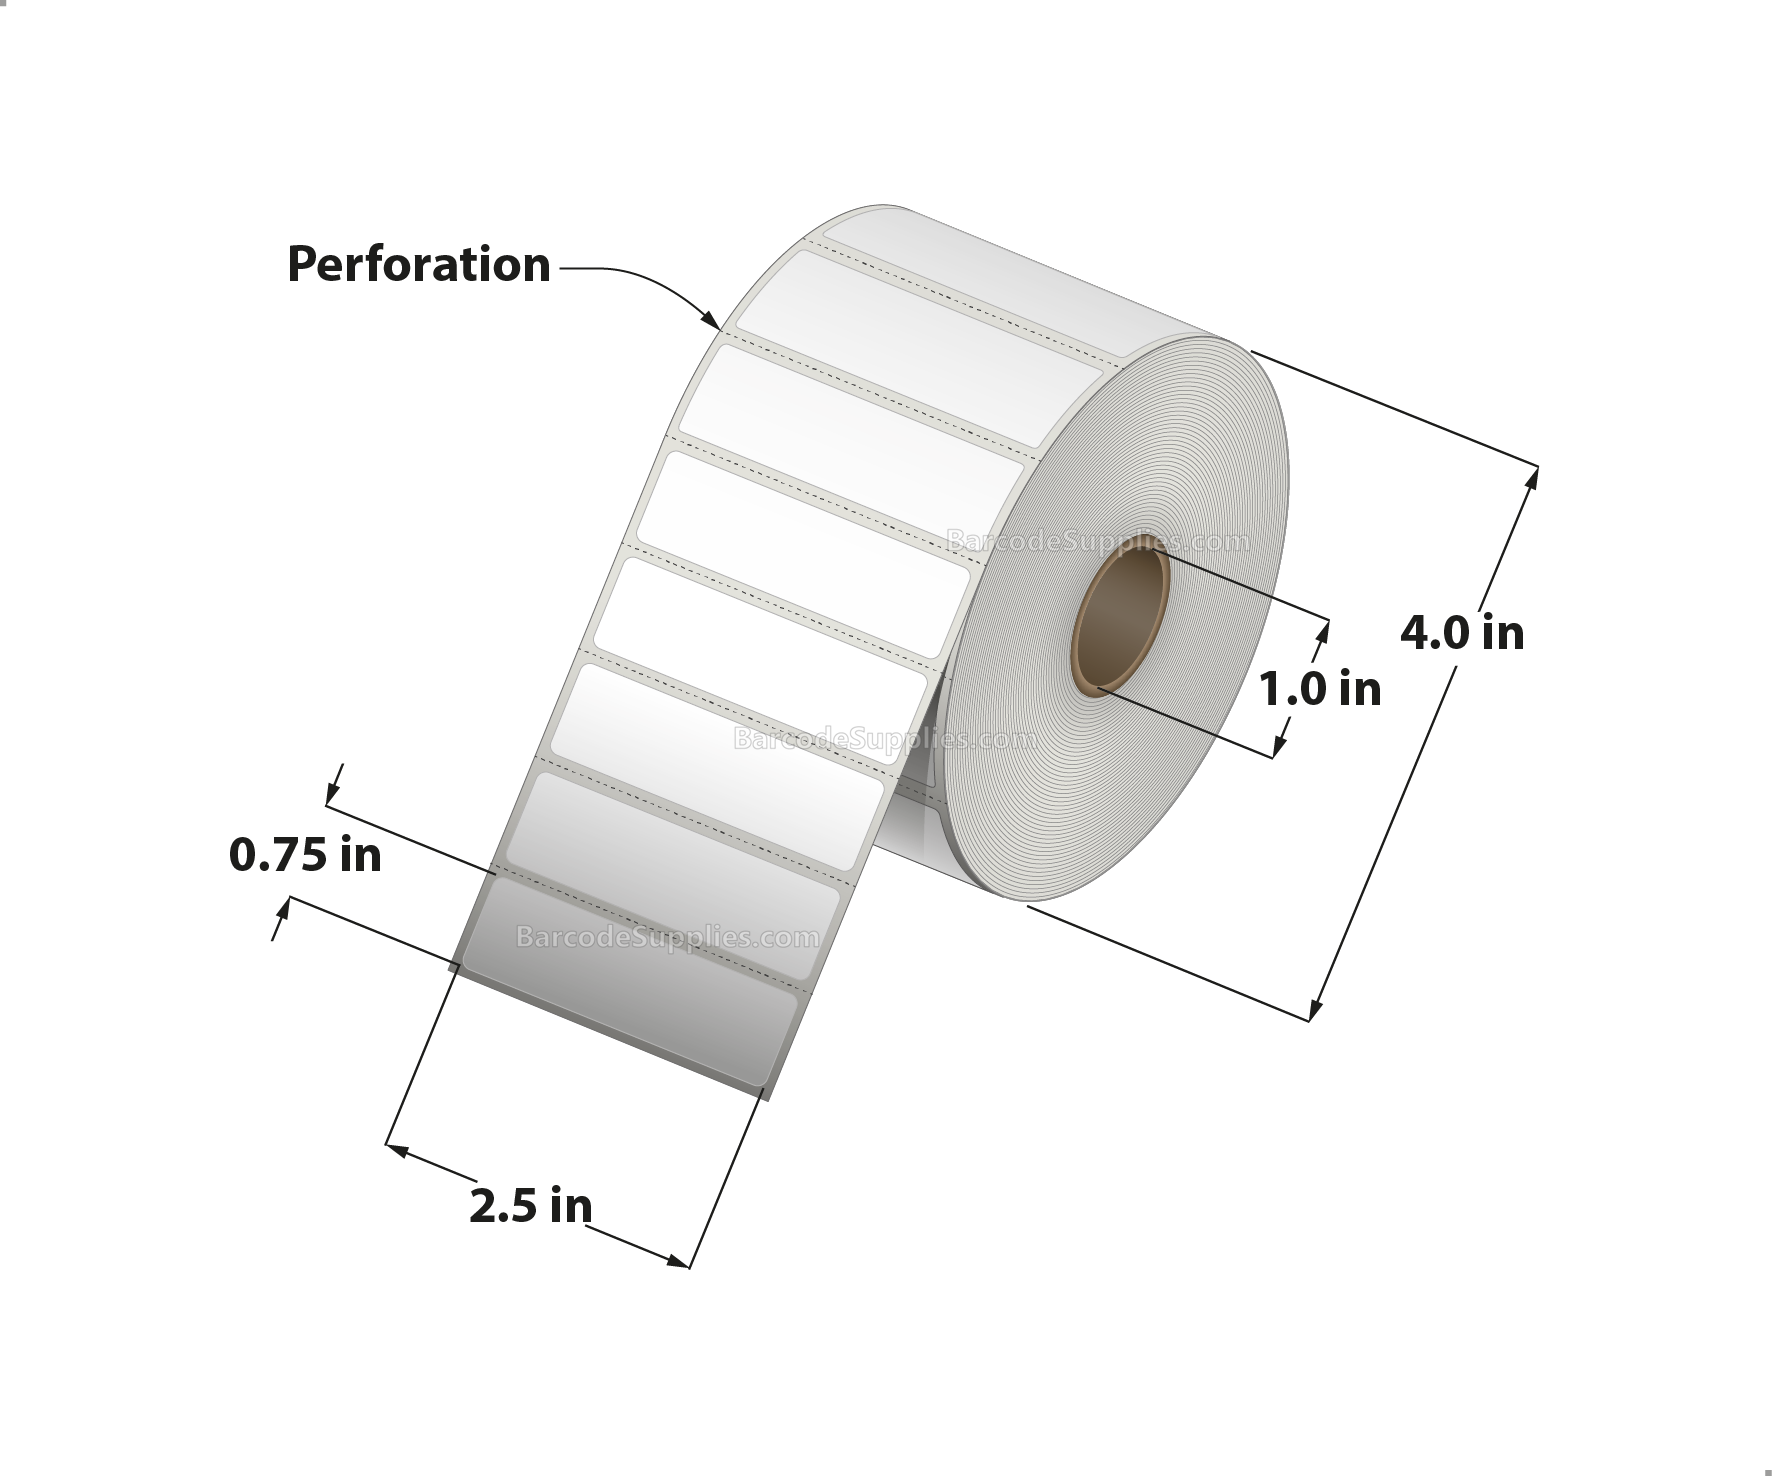 2.5 x 0.75 Direct Thermal White Labels With Acrylic Adhesive - Perforated - 1750 Labels Per Roll - Carton Of 12 Rolls - 21000 Labels Total - MPN: RD-25-075-1750-1